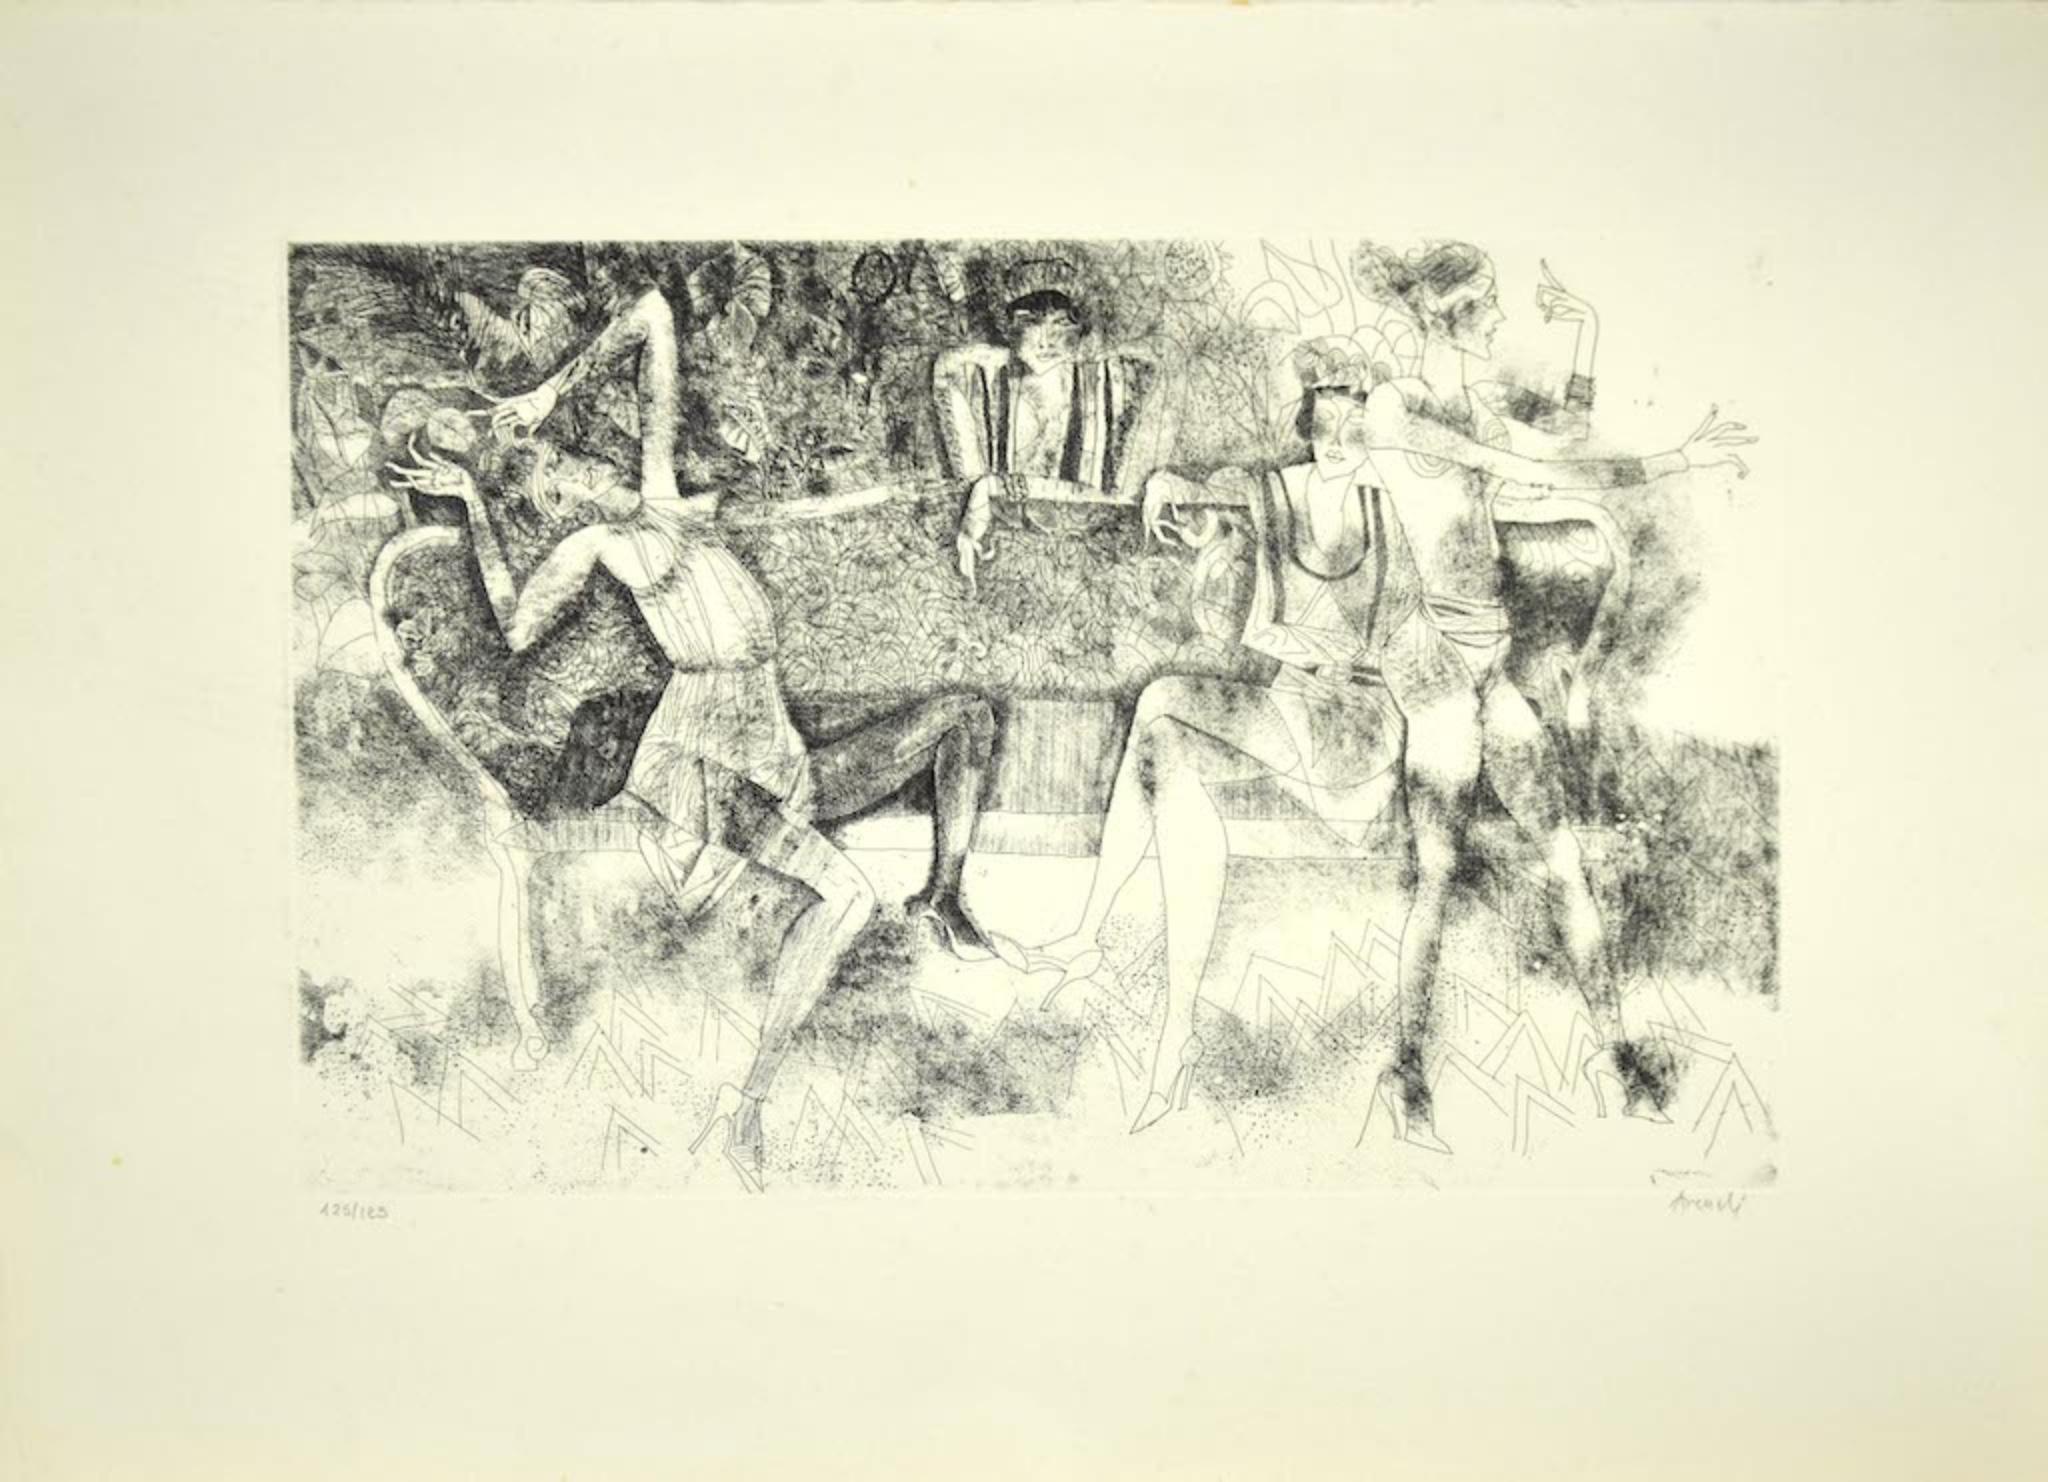 Figures is an original etching on paper by Marcello Avenali.

Hand-signed.

Numbered, edition 125/125. Image Dimensions: 32 x 50 cm

Very good condition except for worn margins.

Marcello Avenali (Rome, 1912 - Rome, 1981), was an Italian artist and